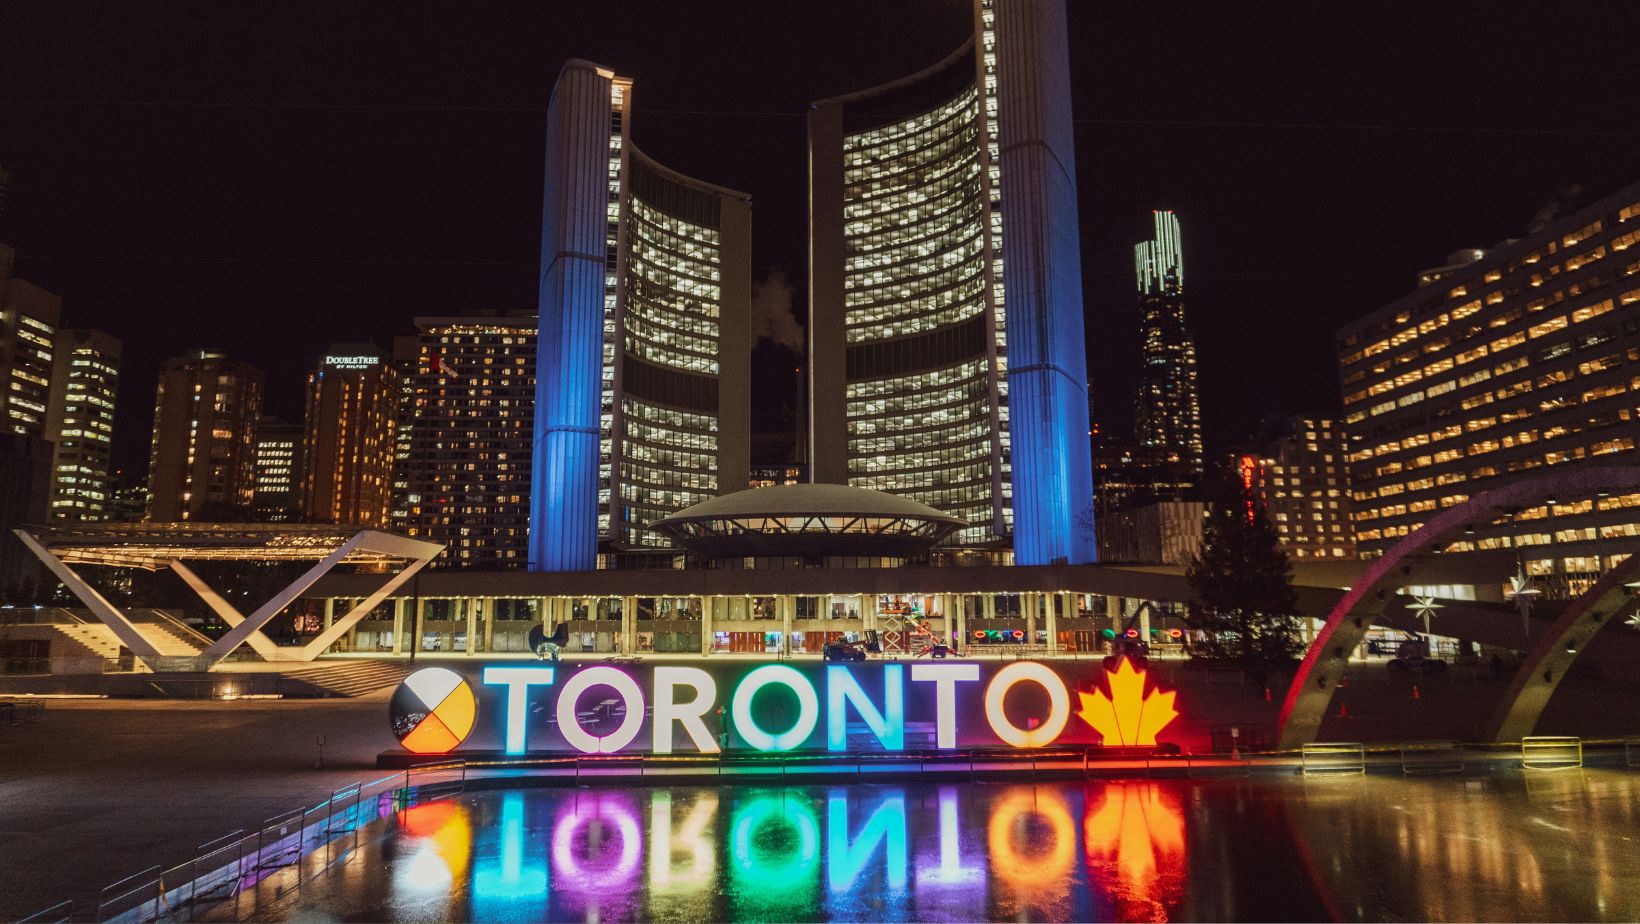 Big buildings and a huge neon Toronto sign at nighttime depicting career opportunities for interior designers in Canada's top cities